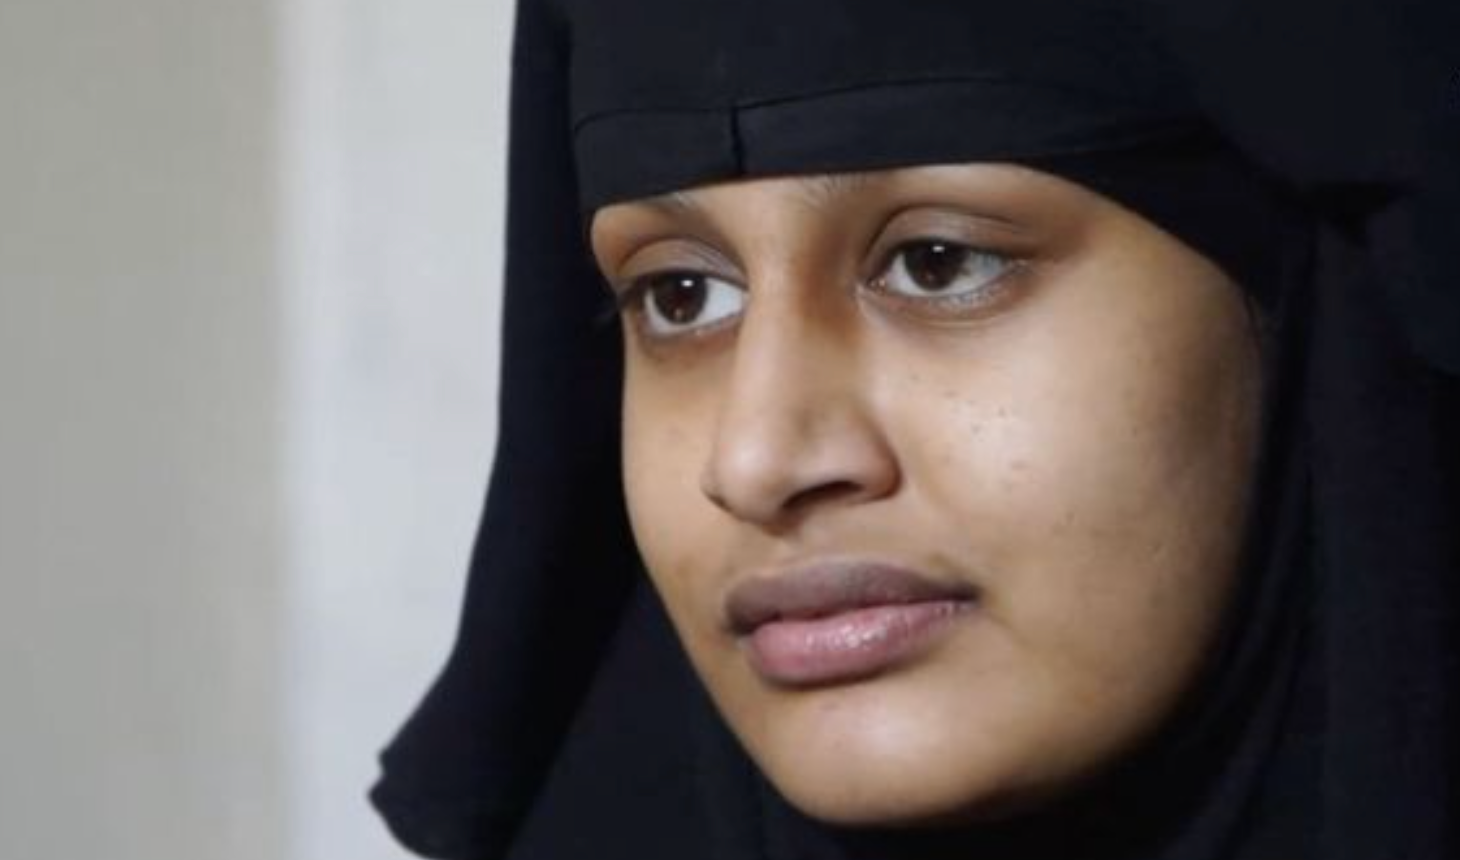 elated links: Richard Madeley had an incredible Partridge moment in Shamima Begum interview Shamima Begum says PM ‘doesn’t know what he’s doing’ fighting UK extremism Shamima Begum’s ex-lawyer facing investigation for Taliban tweet